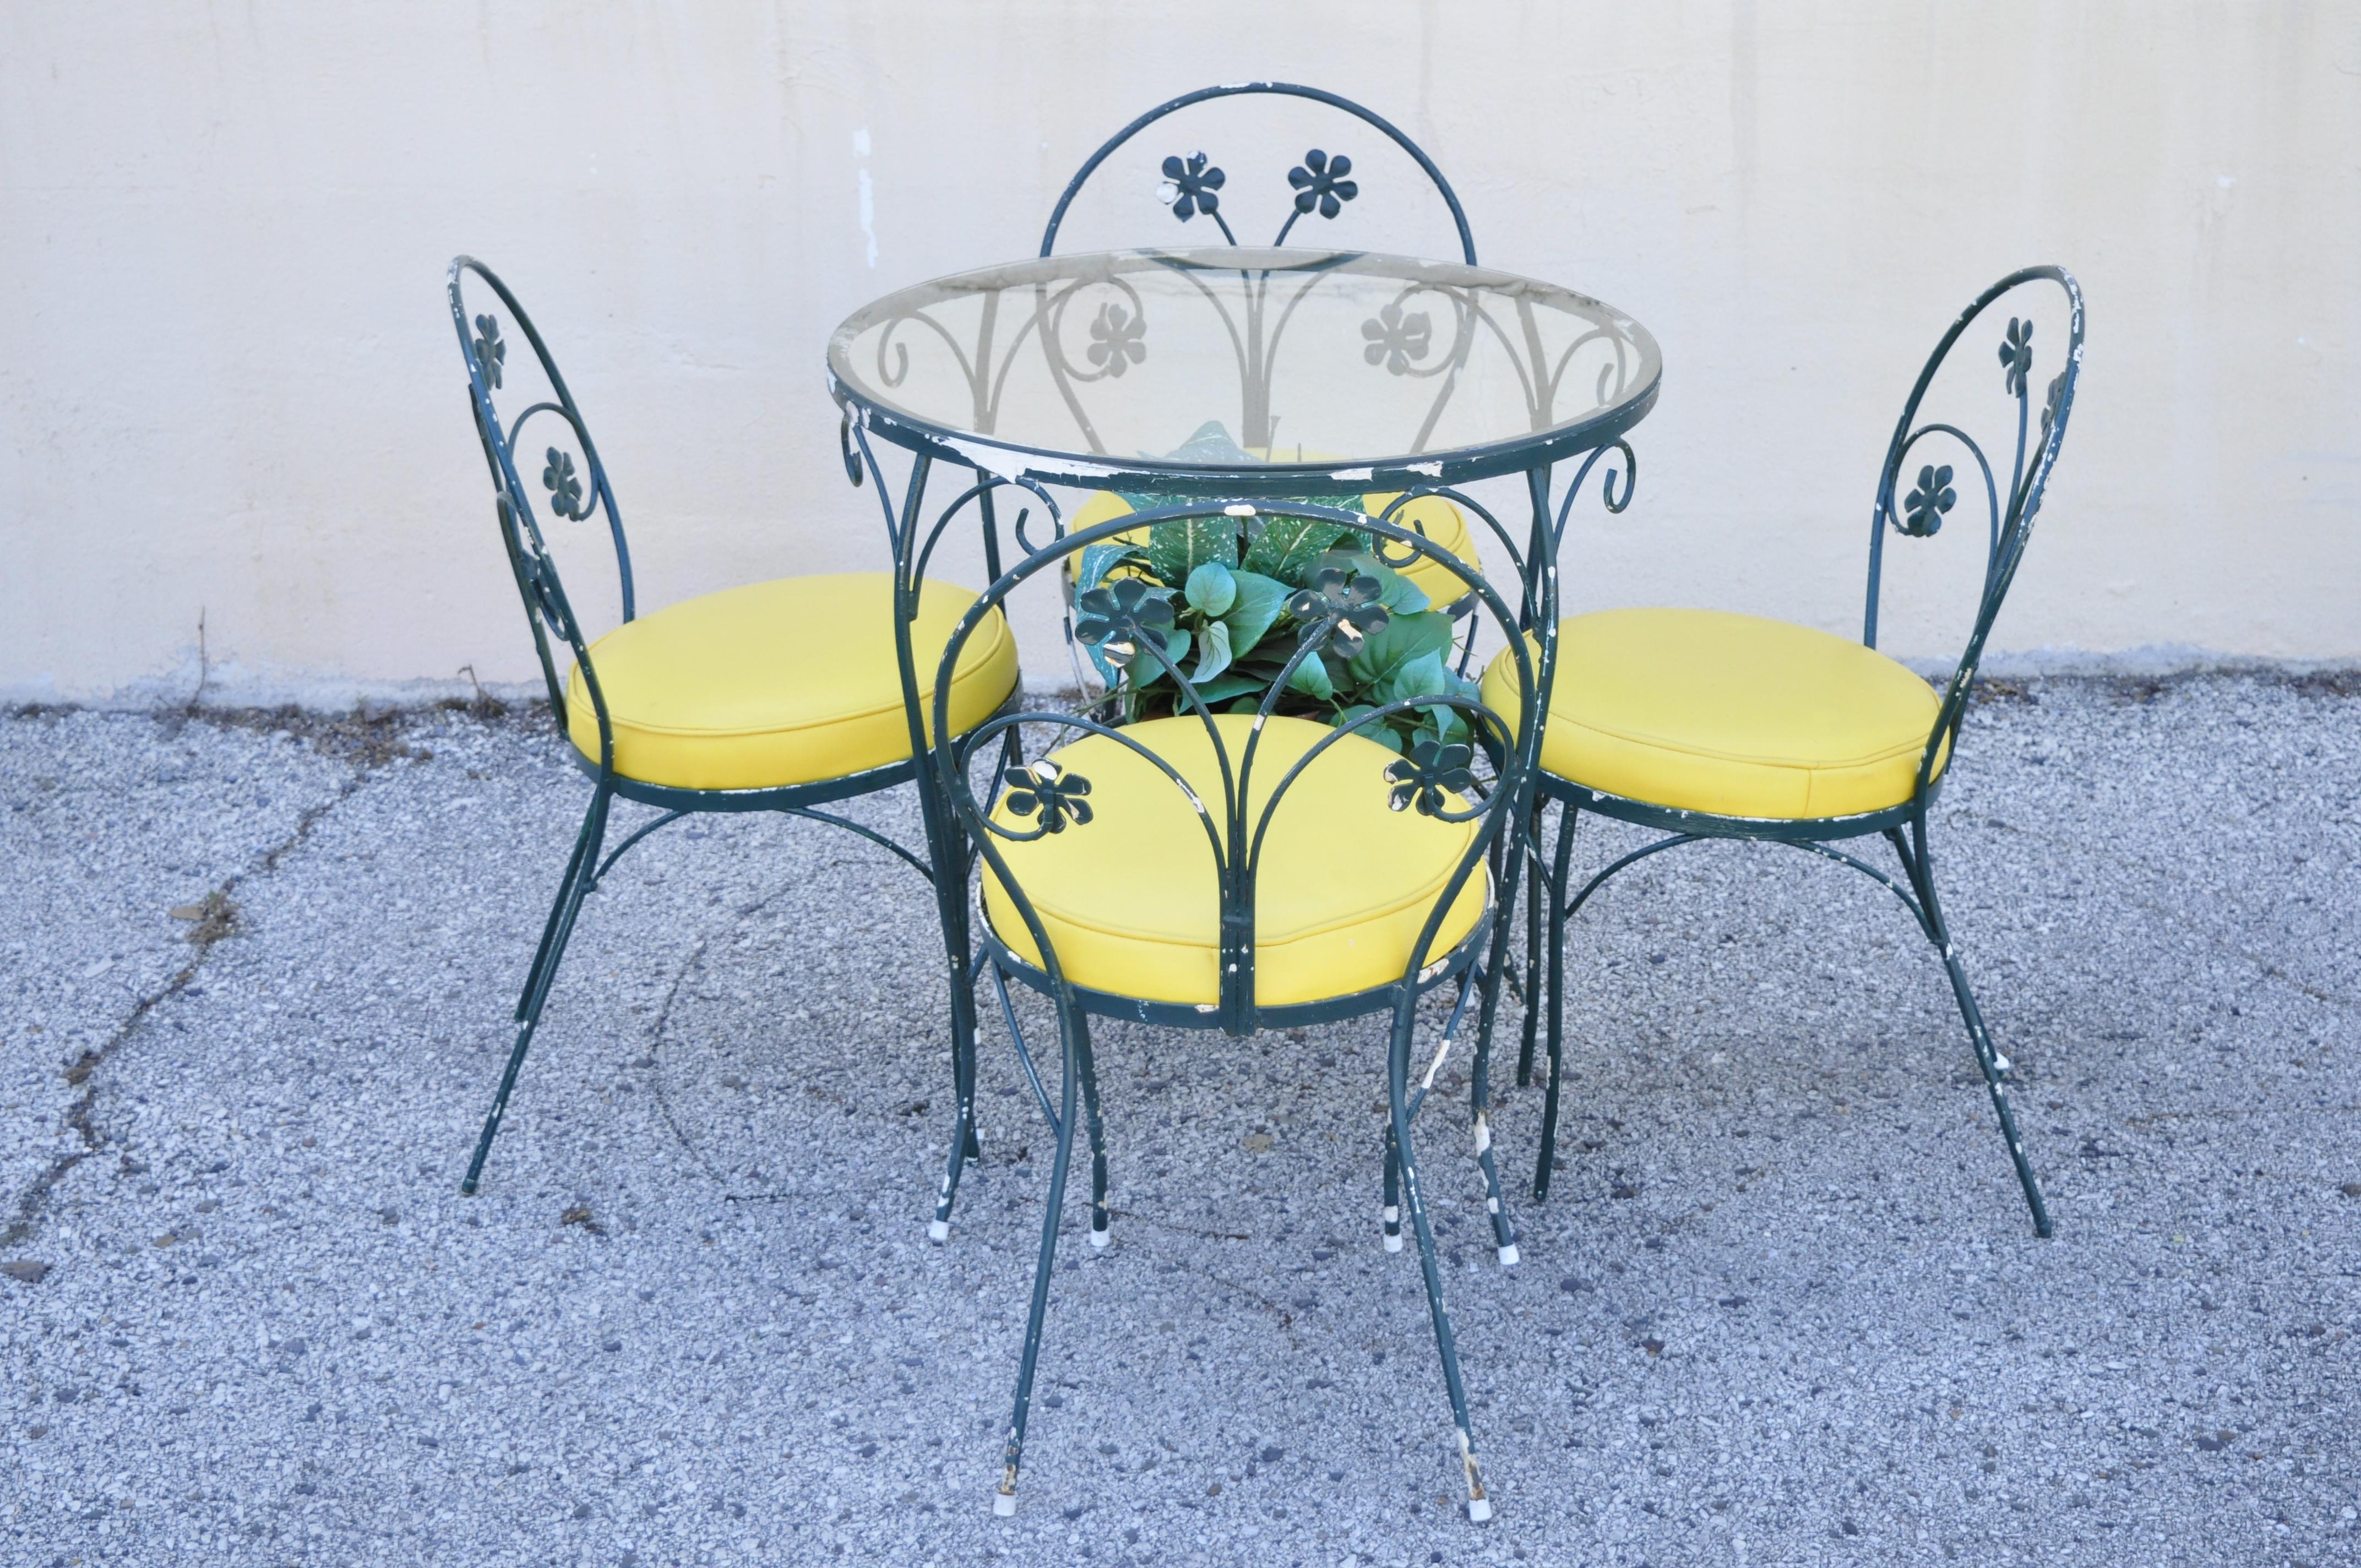 Vintage Plantation Patterns Iron Daisy Flower Bistro Dining Set 4 Chairs Table 2